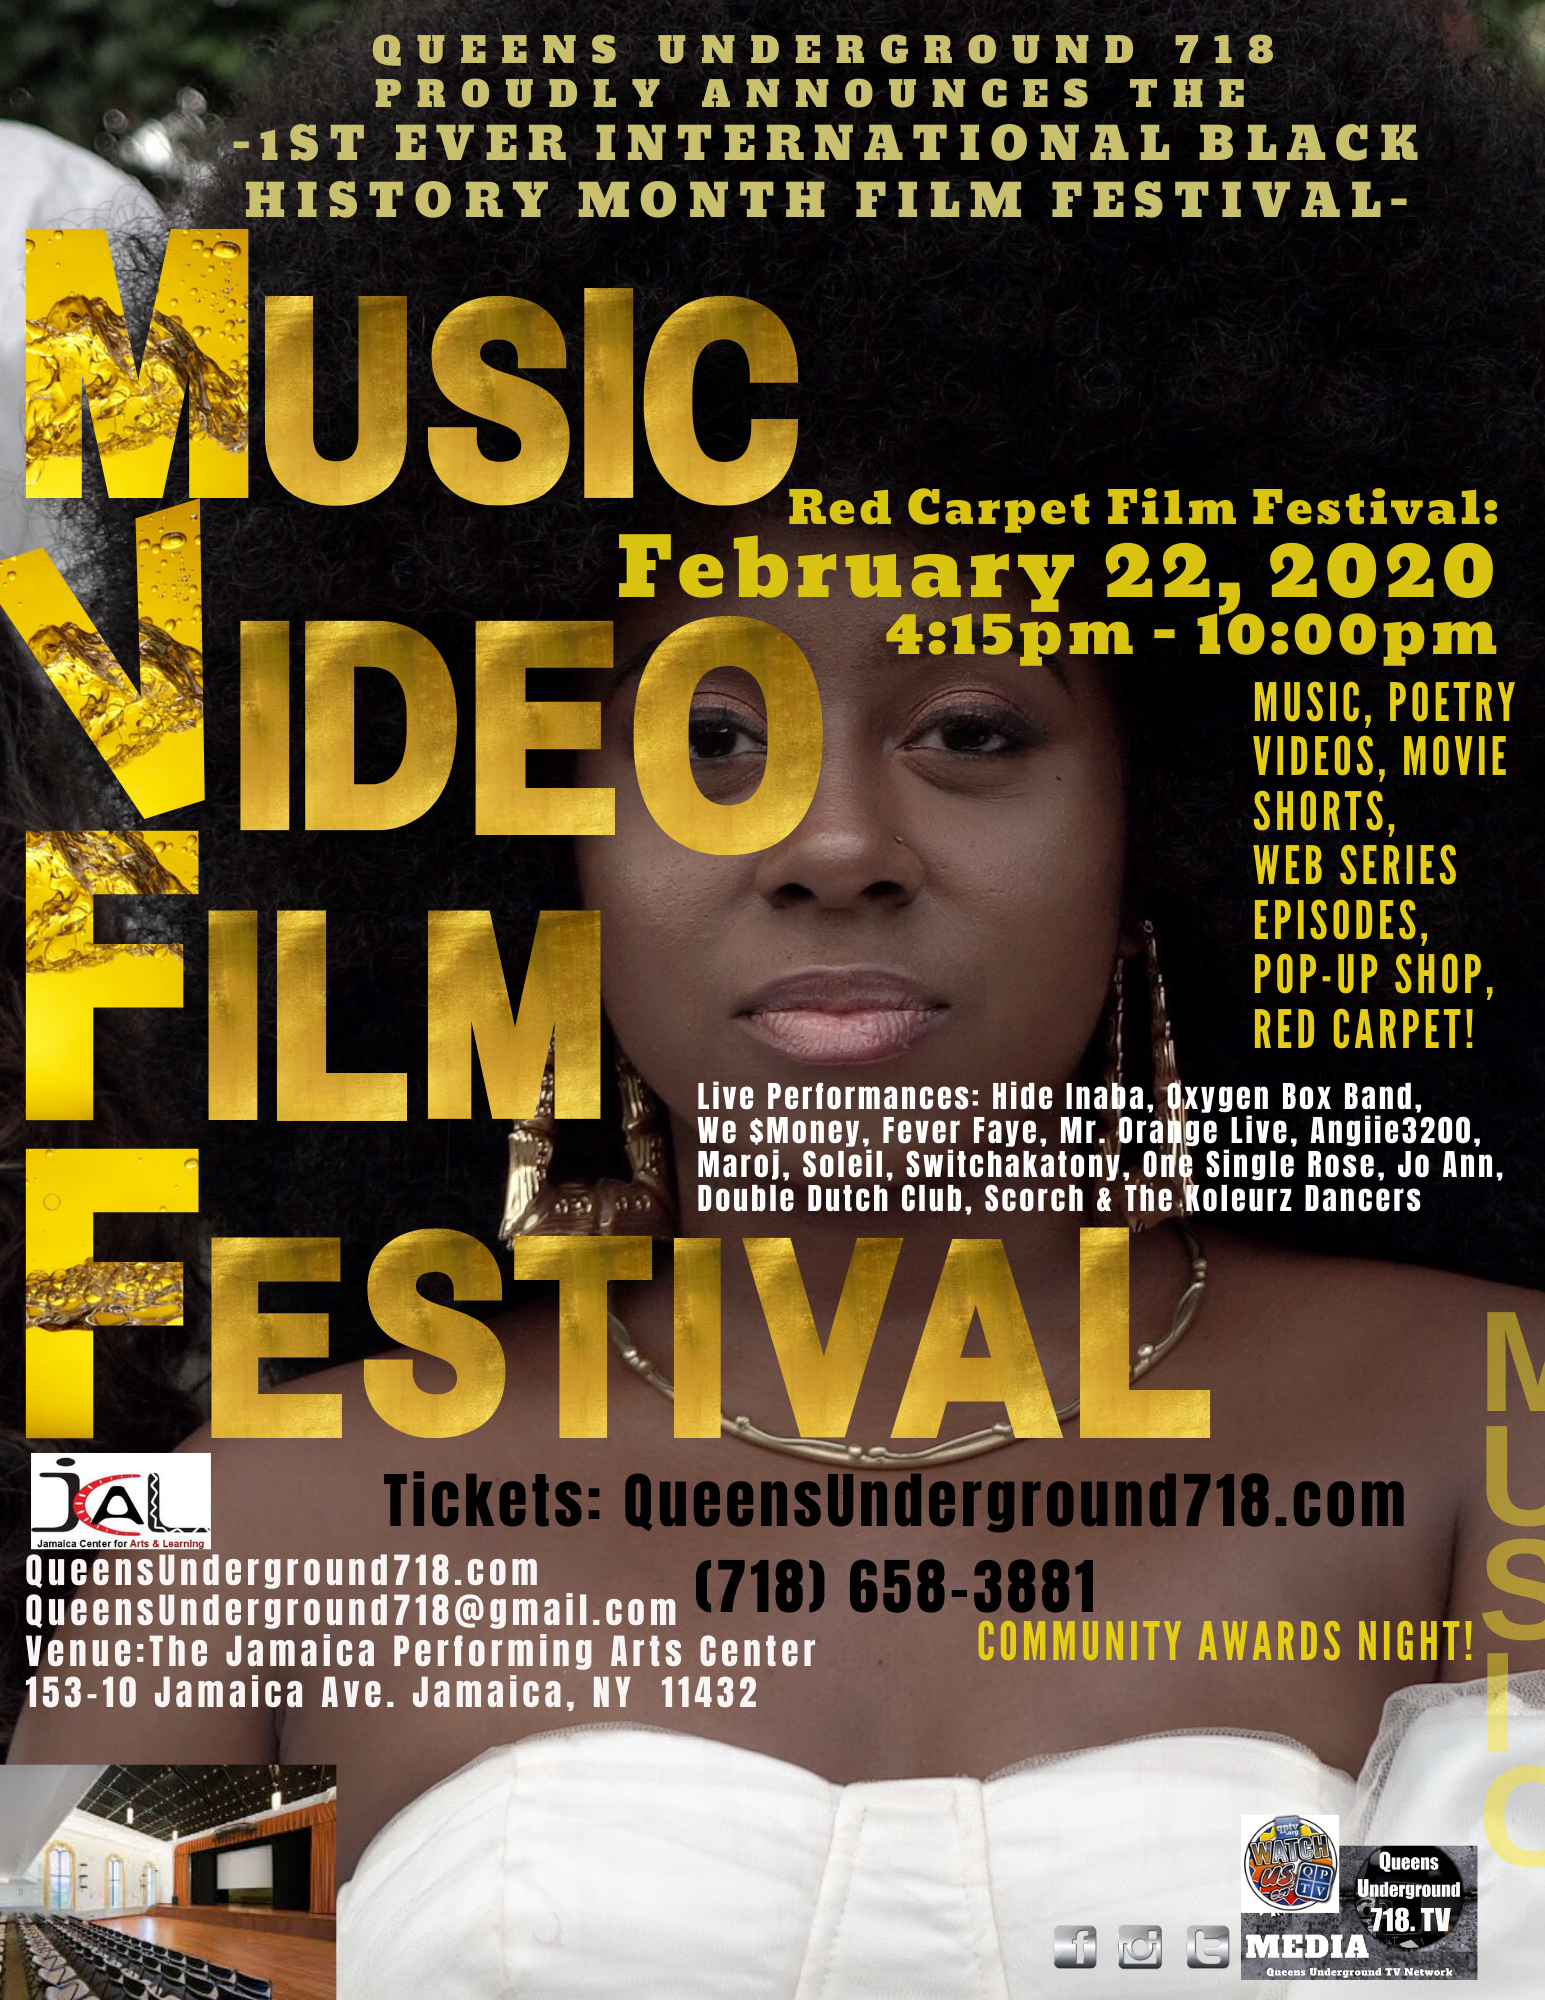 BLACK HISTORY MONTH MOVIES, Music, Web Series, Poetry & FREE SUBMISSIONS